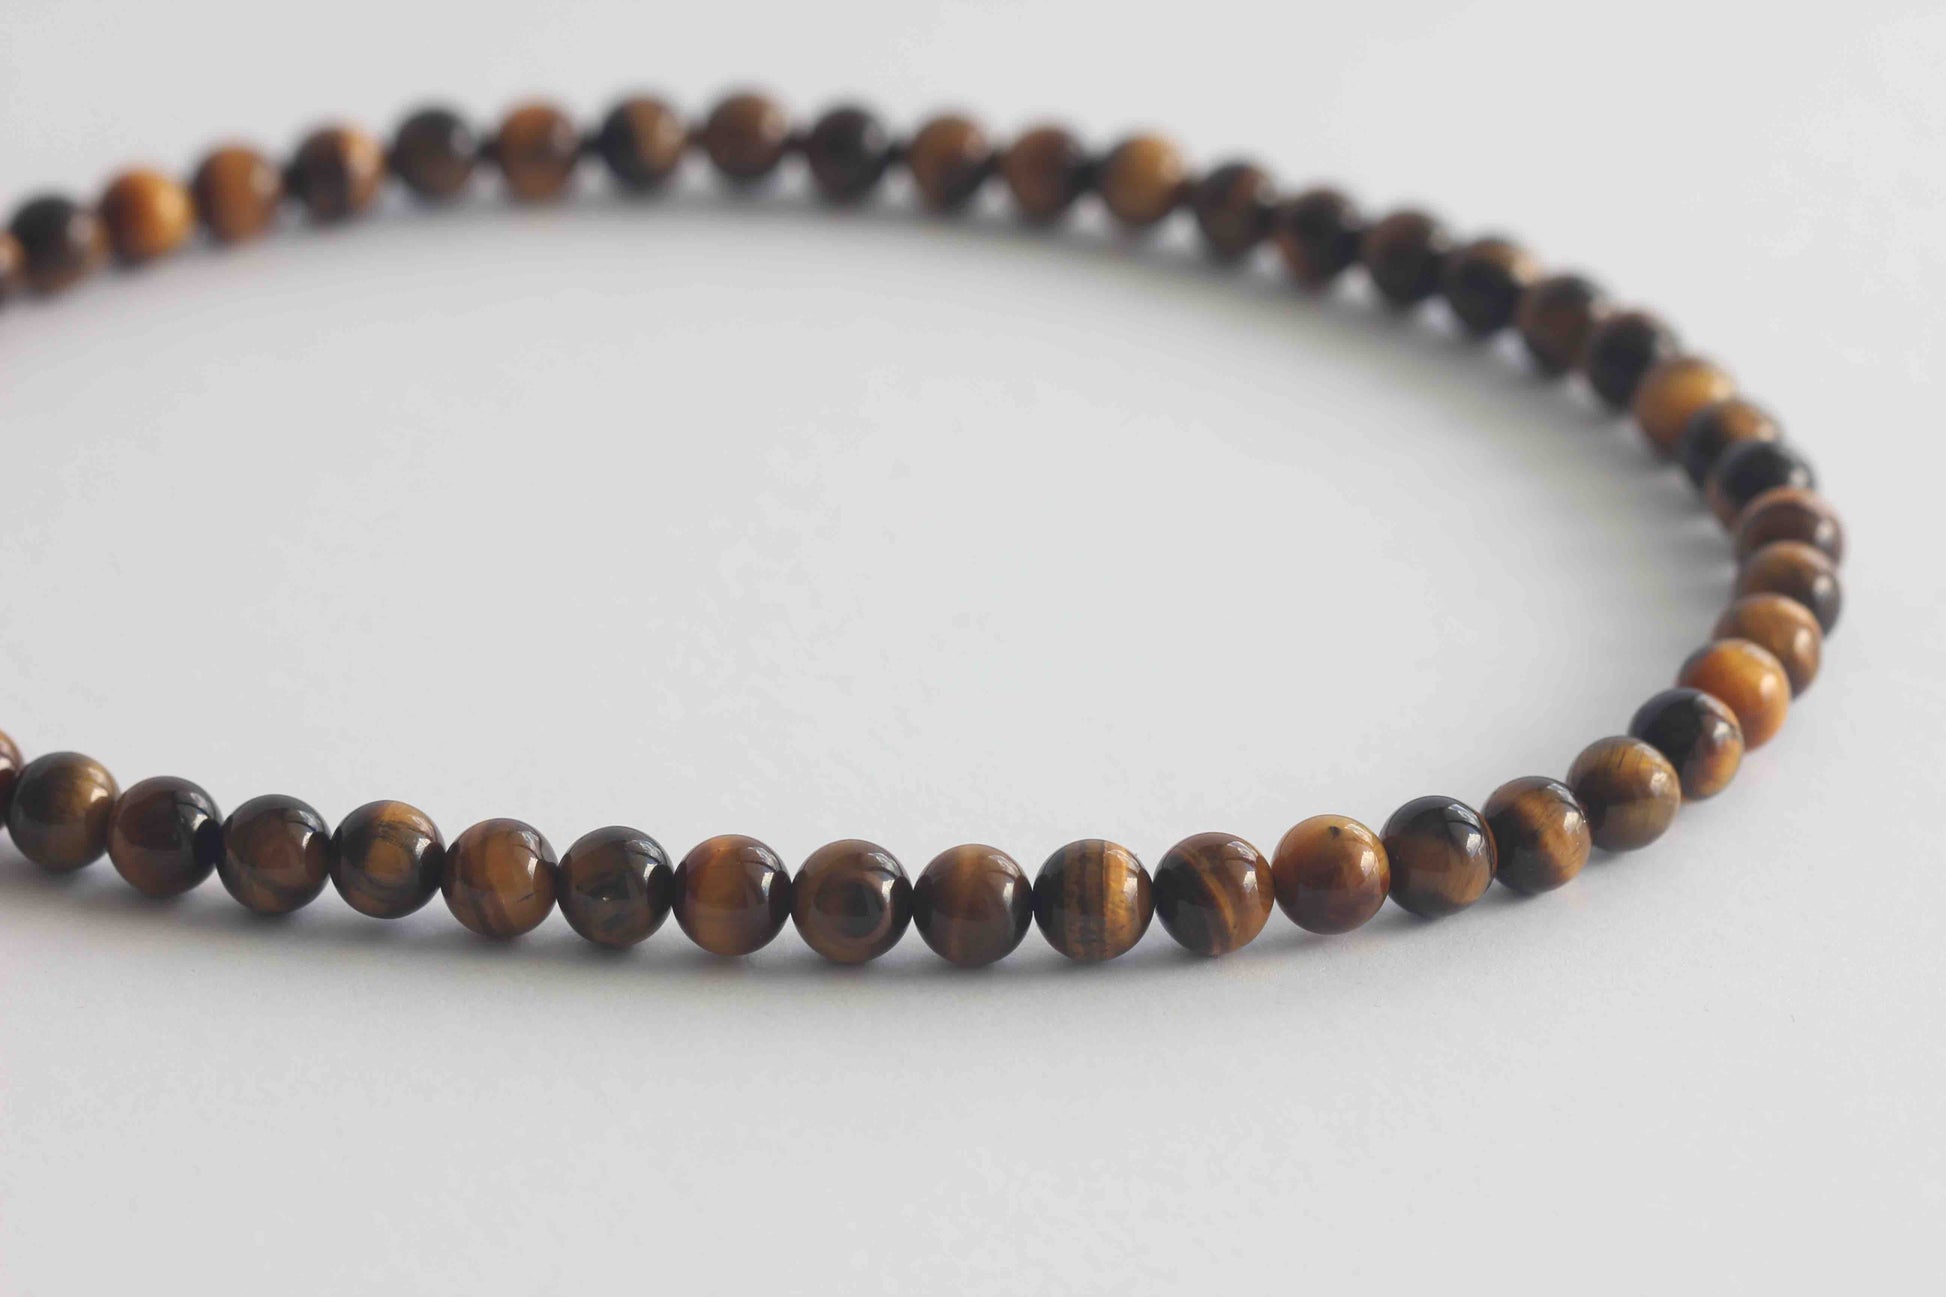 Tiger's Eye Beaded Gemstone Necklace with 925 Sterling Silver Closure